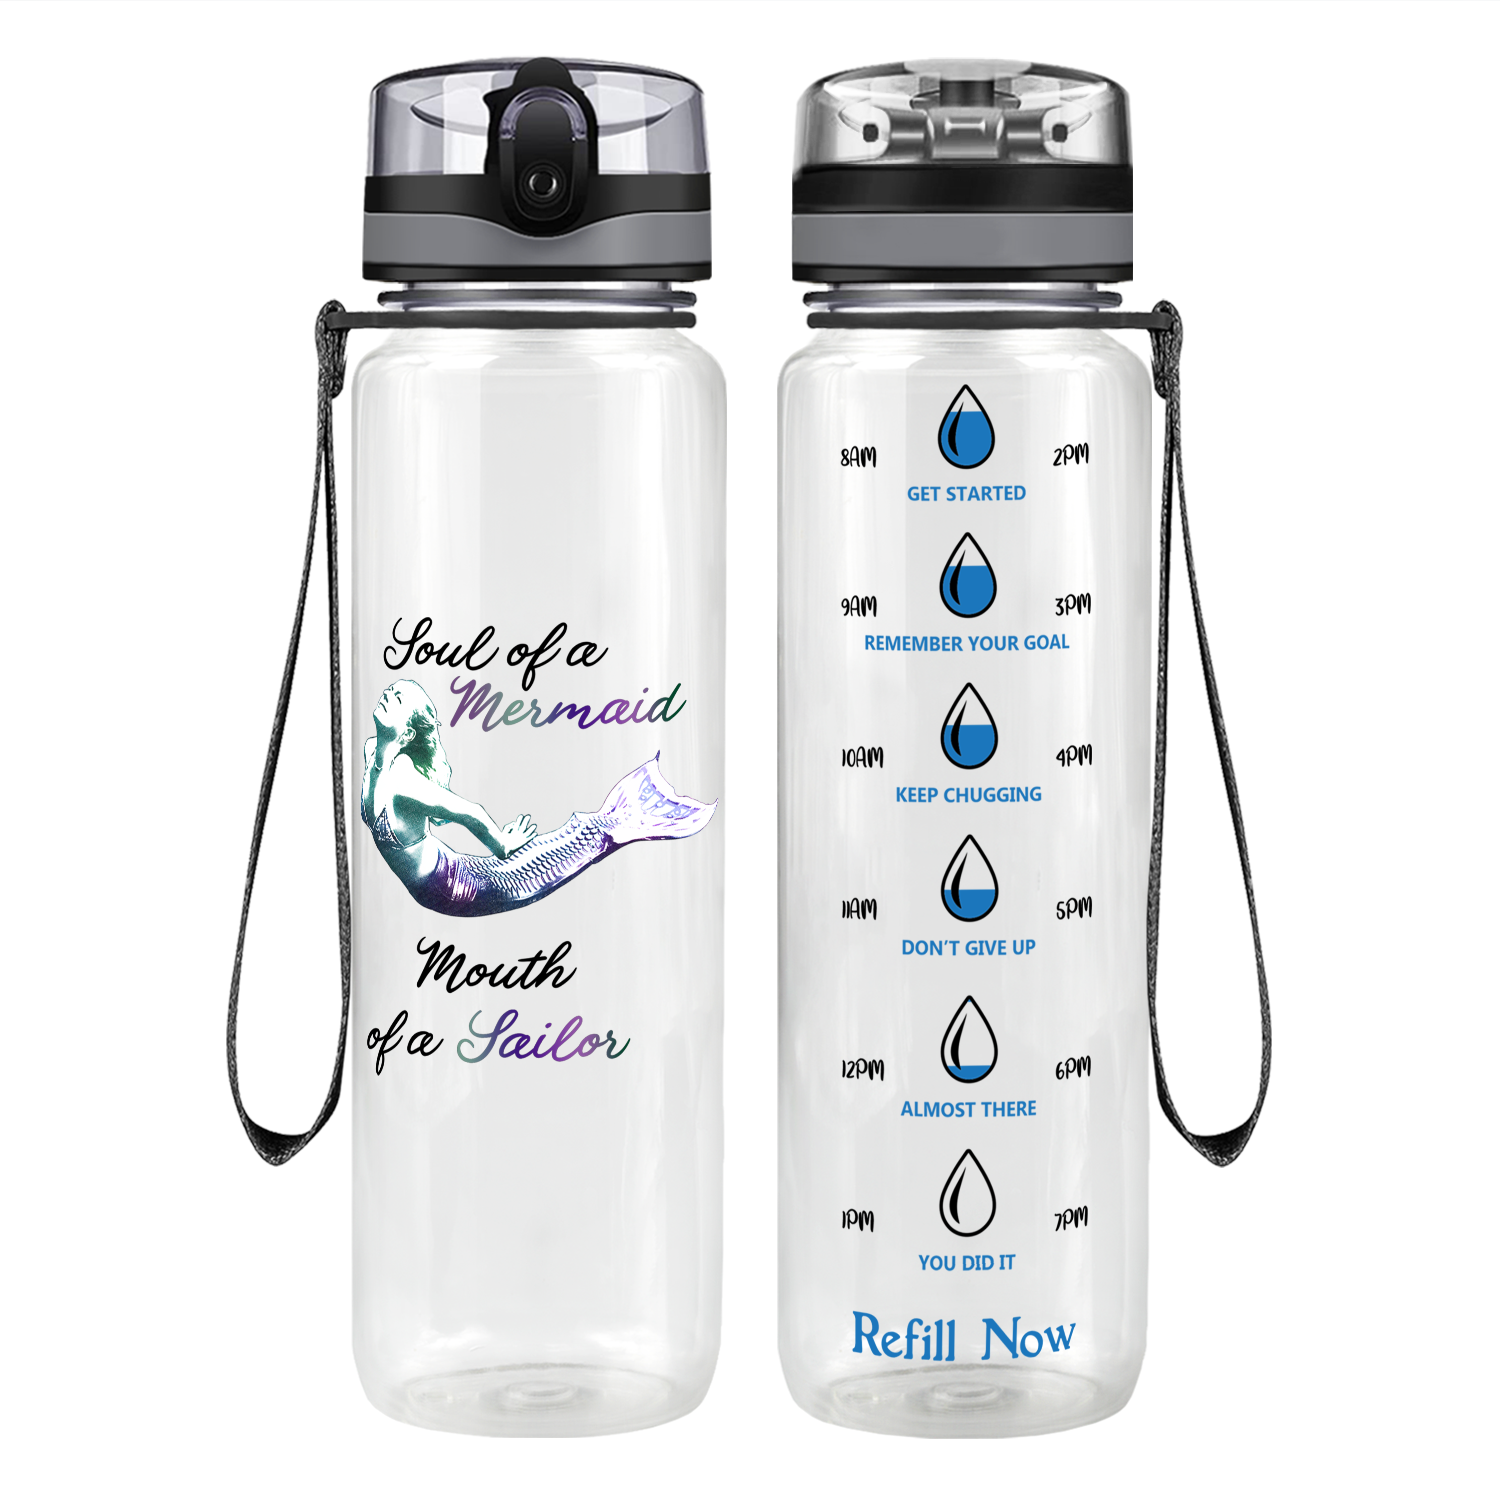 Soul of a Mermaid Motivational Tracking Water Bottle